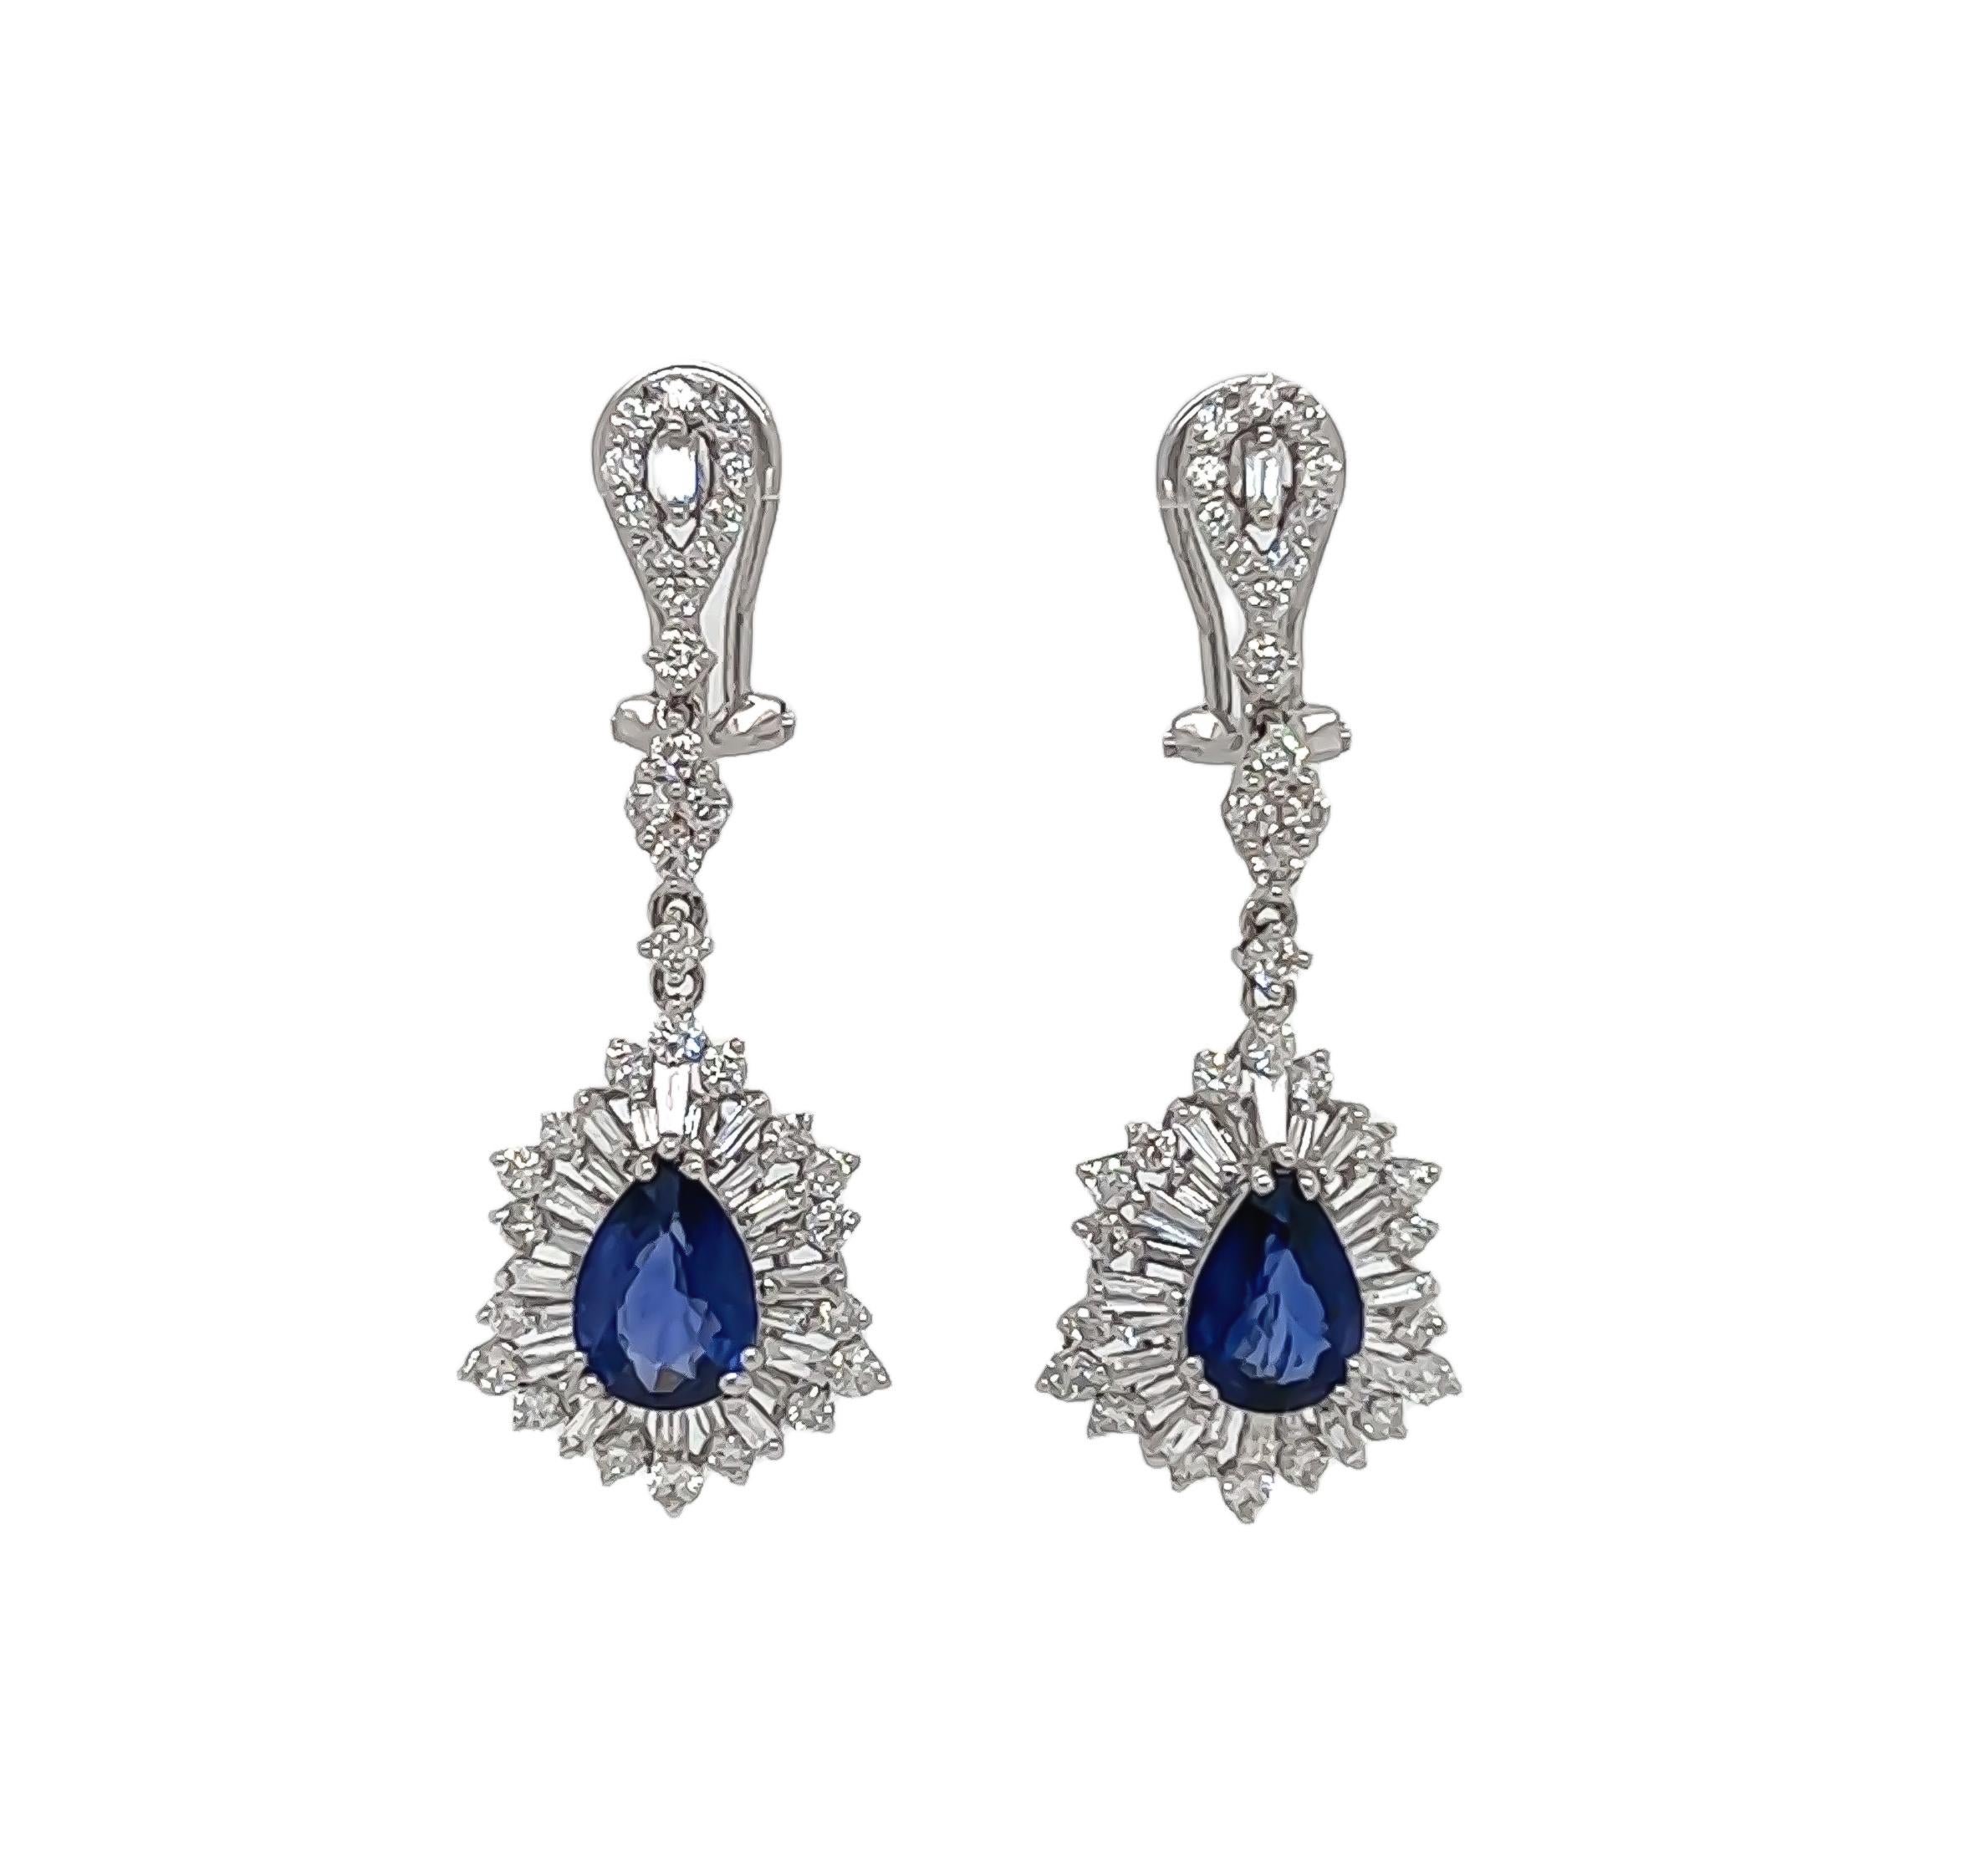 4.38 Total Carat Sapphire with Baguette and Round Diamond Earrings in 18K White Gold

This gorgeous pair of sapphire earrings are sure to draw all eyes on you. It is created with 2.35 carats of pear cut Sapphires, surrounded by a halo of baguette